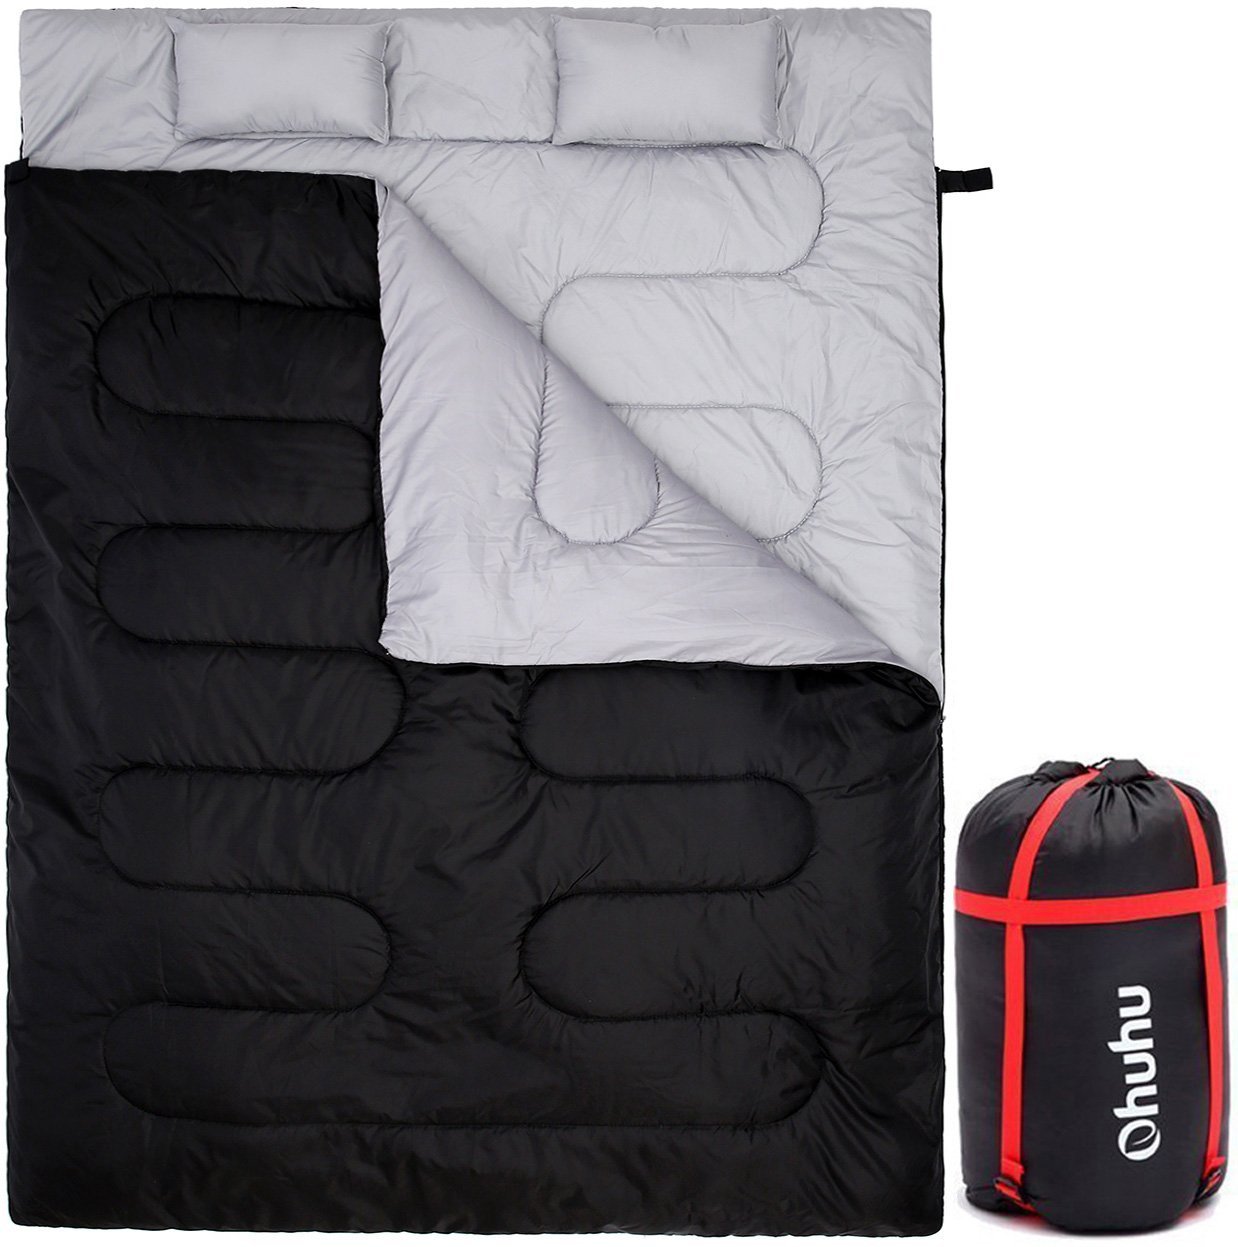 Ohuhu Double Sleeping Bag with 2 Pillows & Carrying Bag Only $43.99 Shipped!